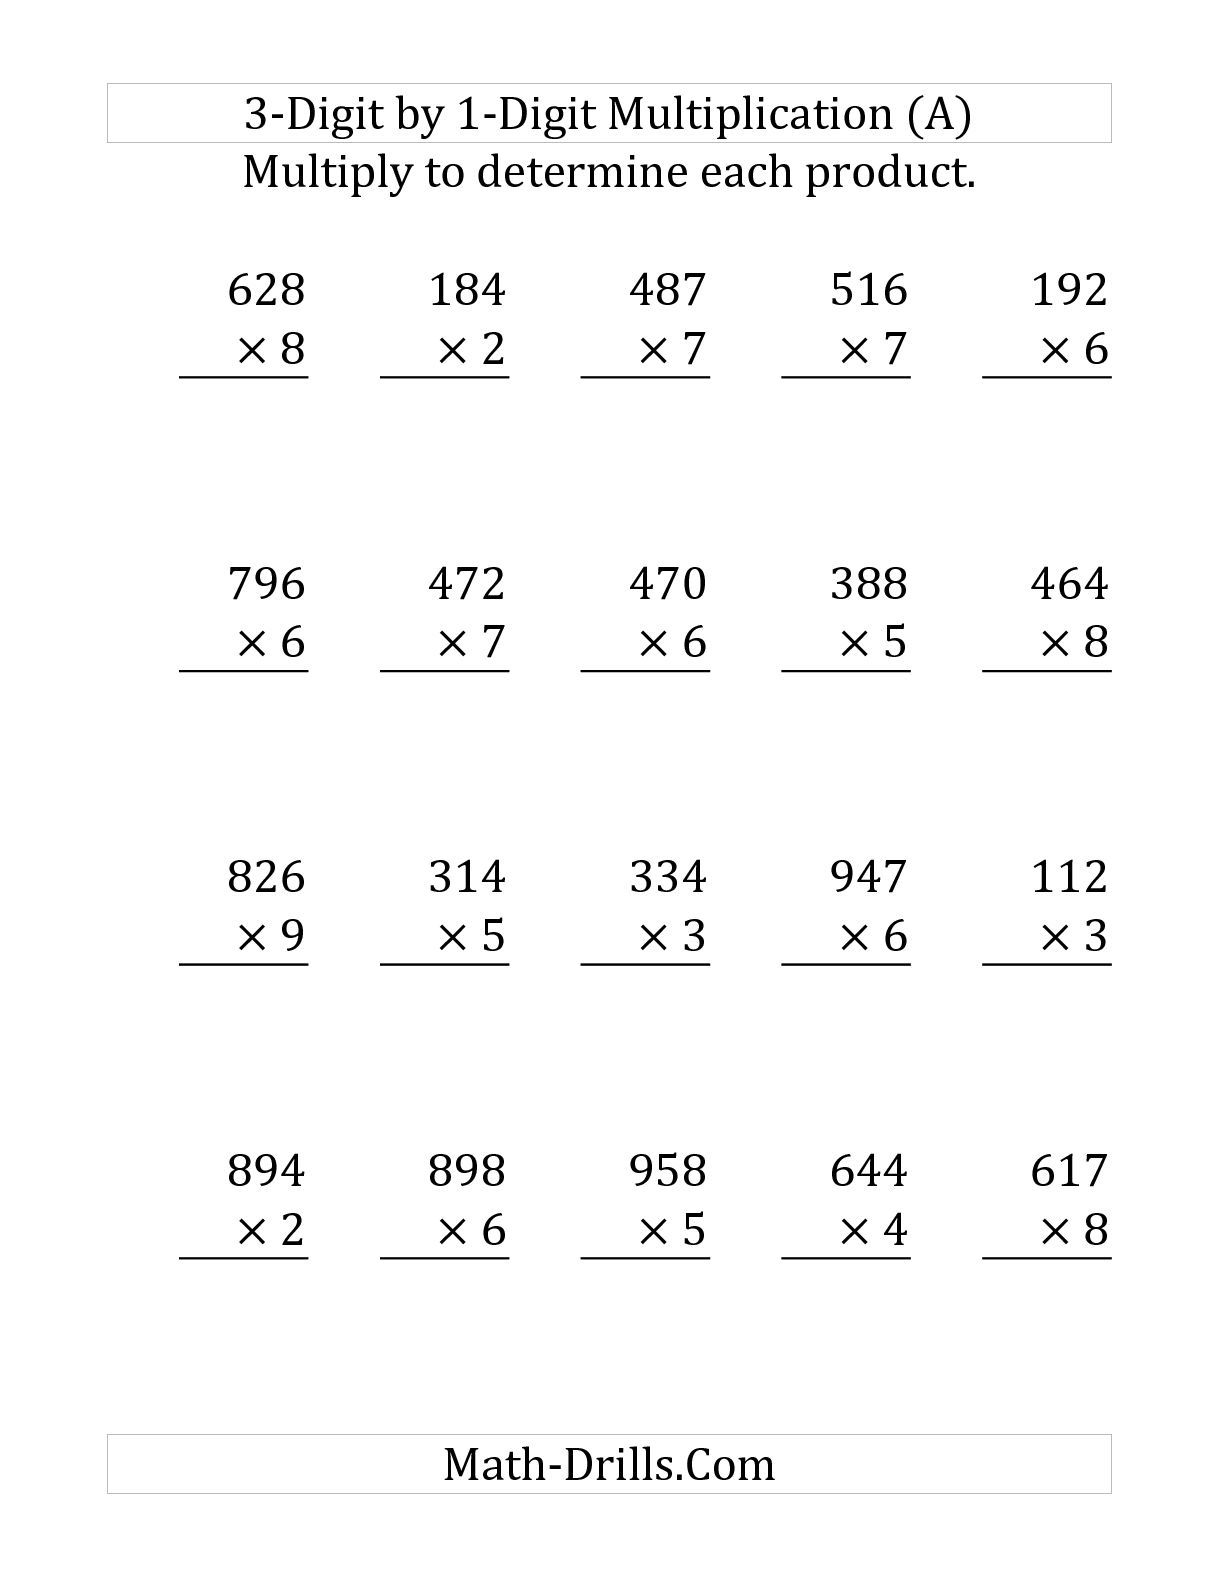 3-digit-by-1-digit-multiplication-games-and-worksheets